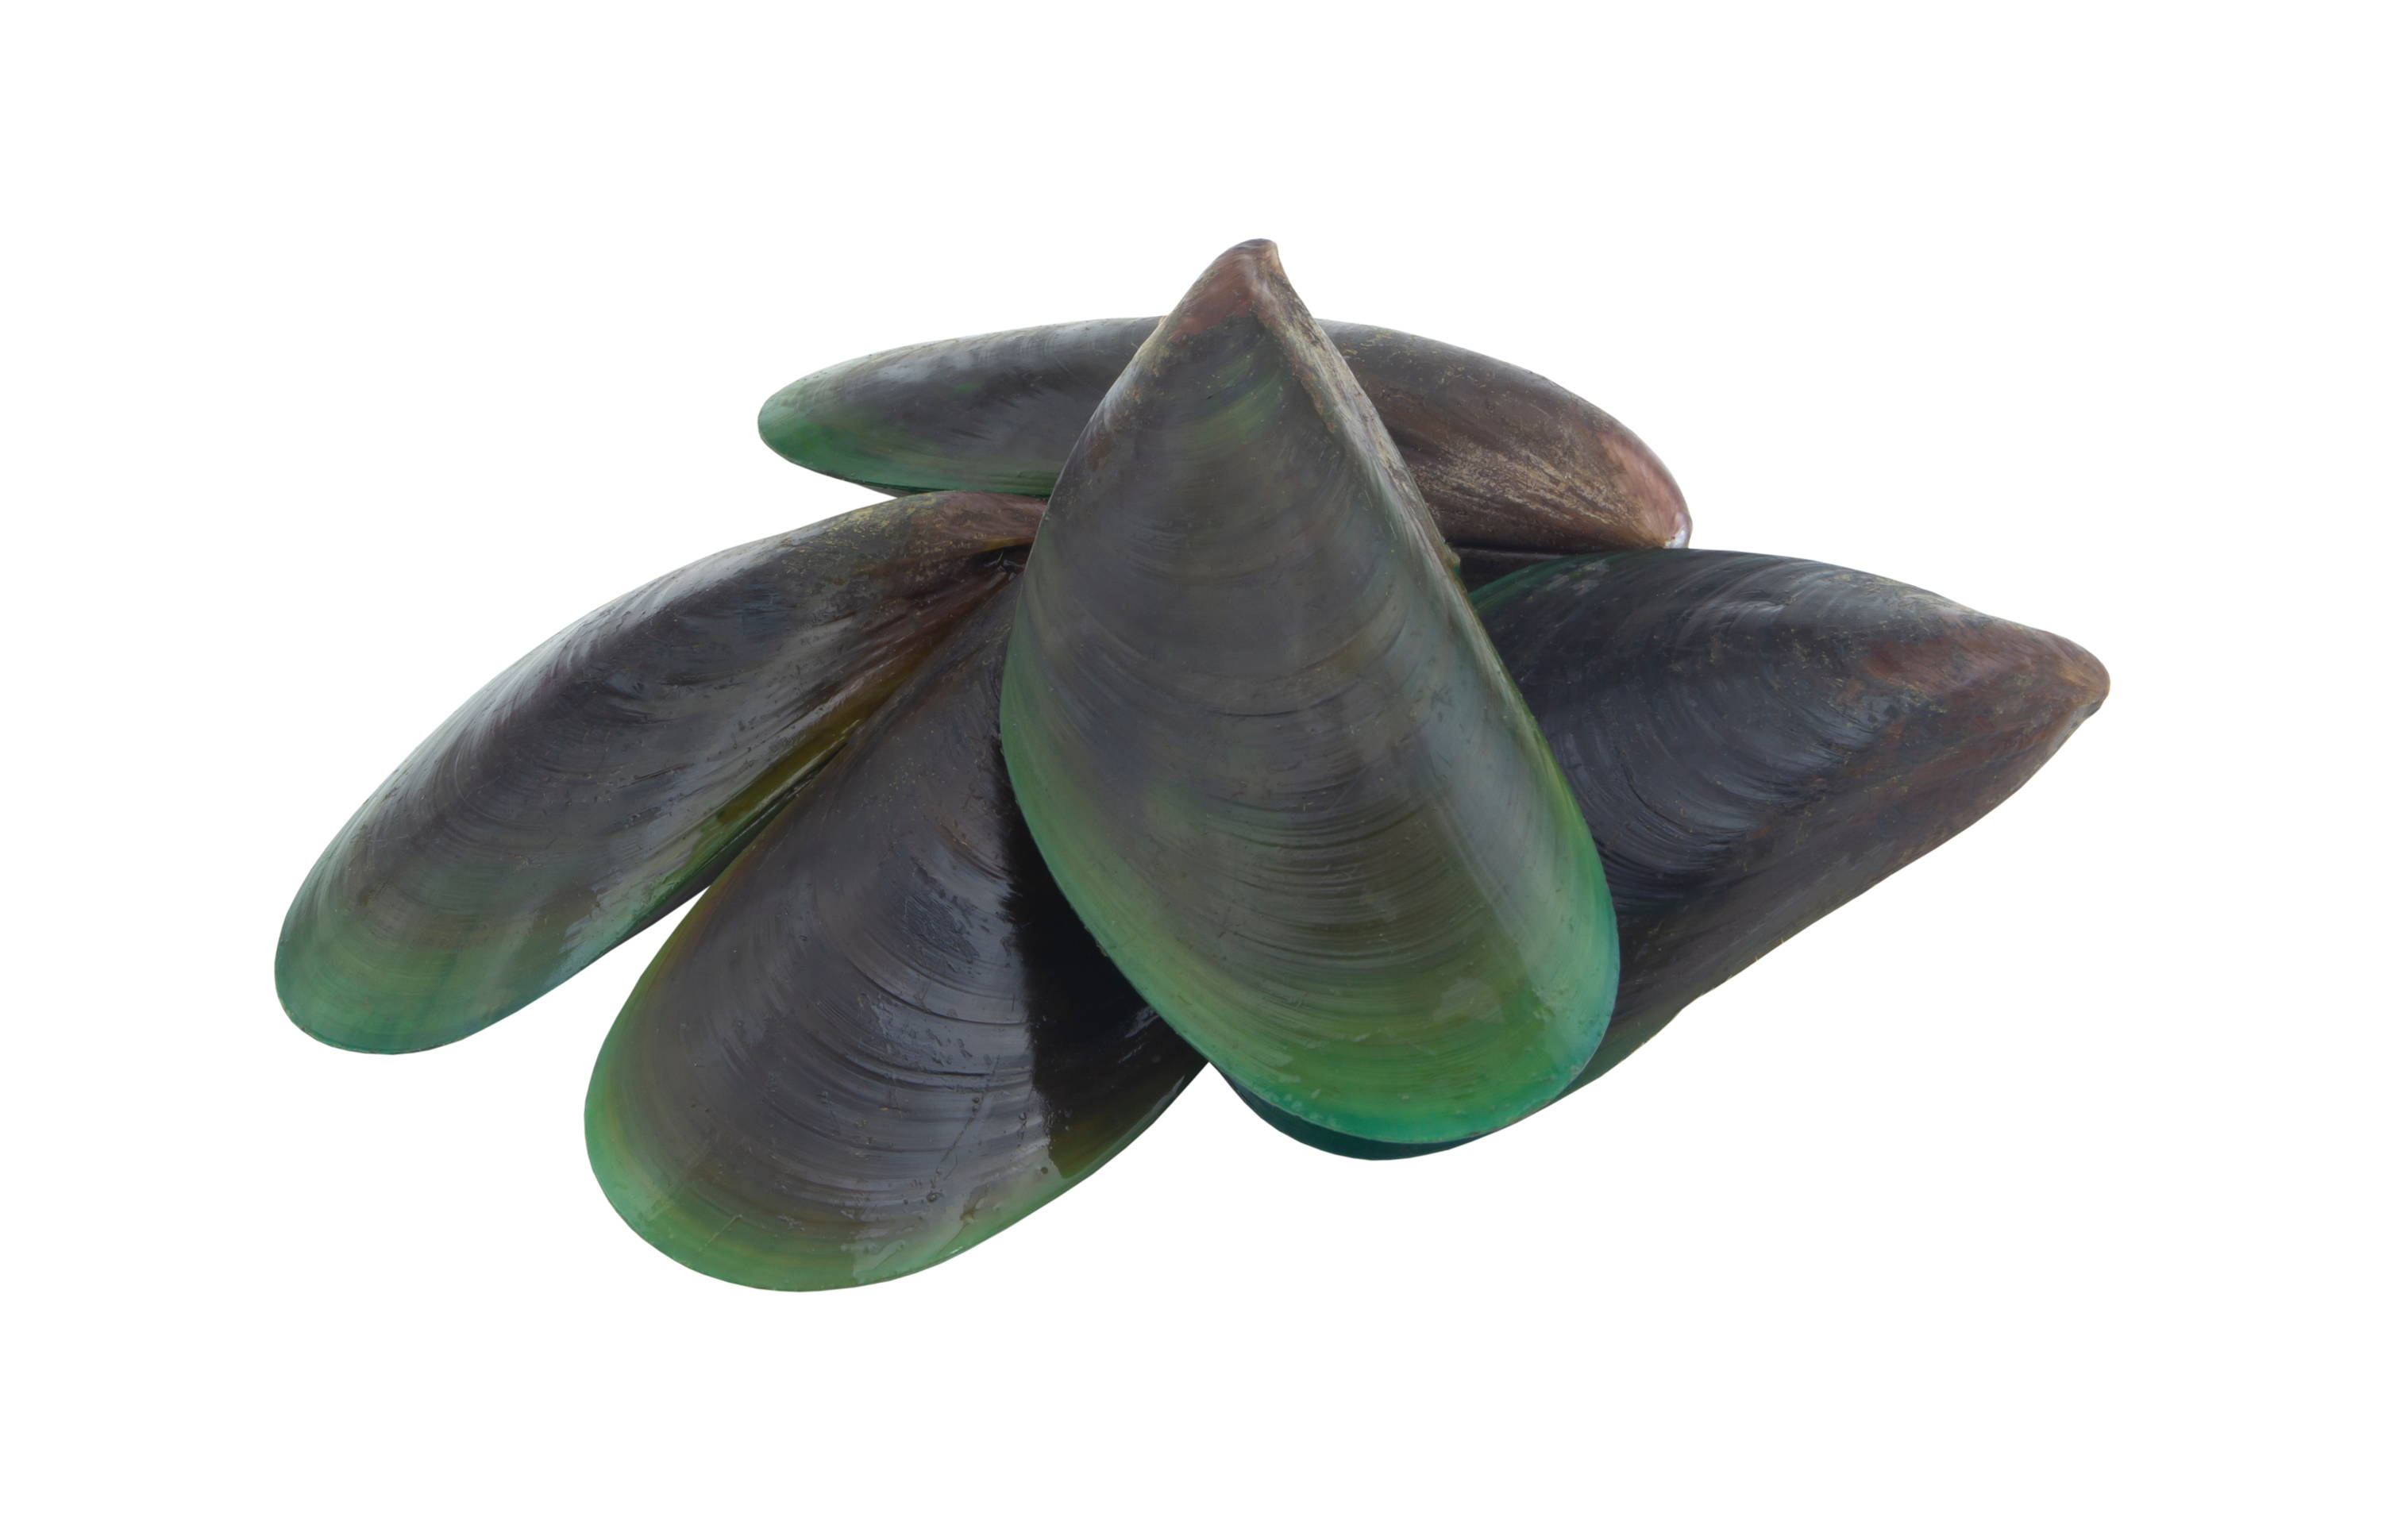 Green lipped mussel